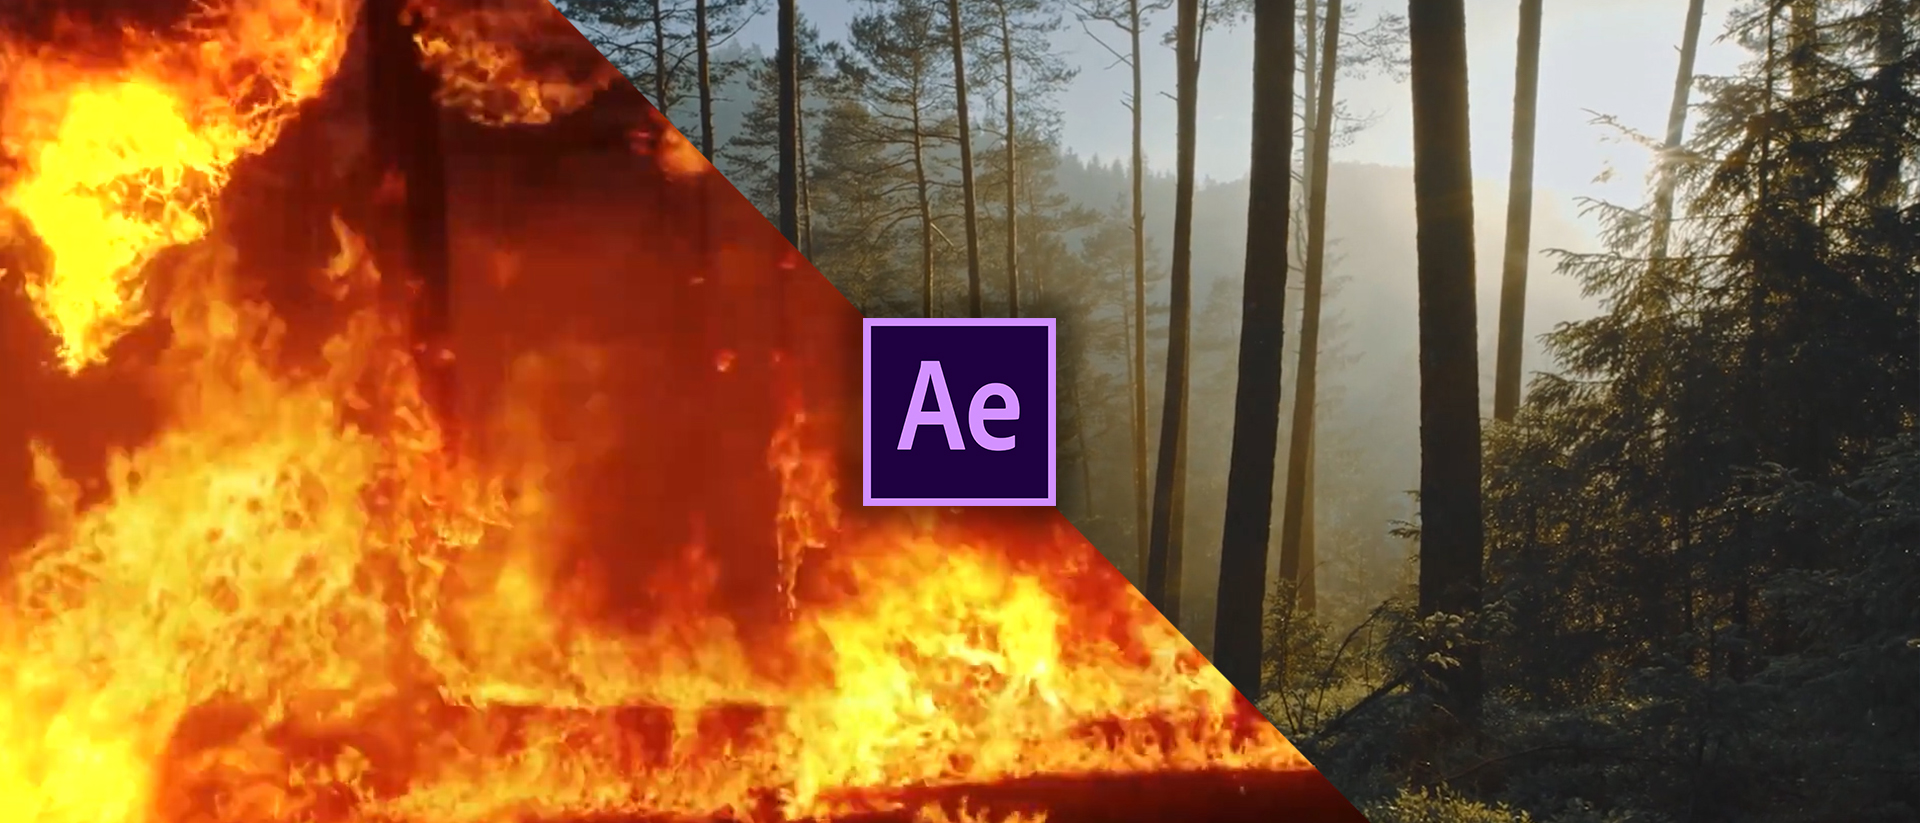 VFX Tutorial By Ignace Aleya: Creating A Realistic Forest Fire In After Effects